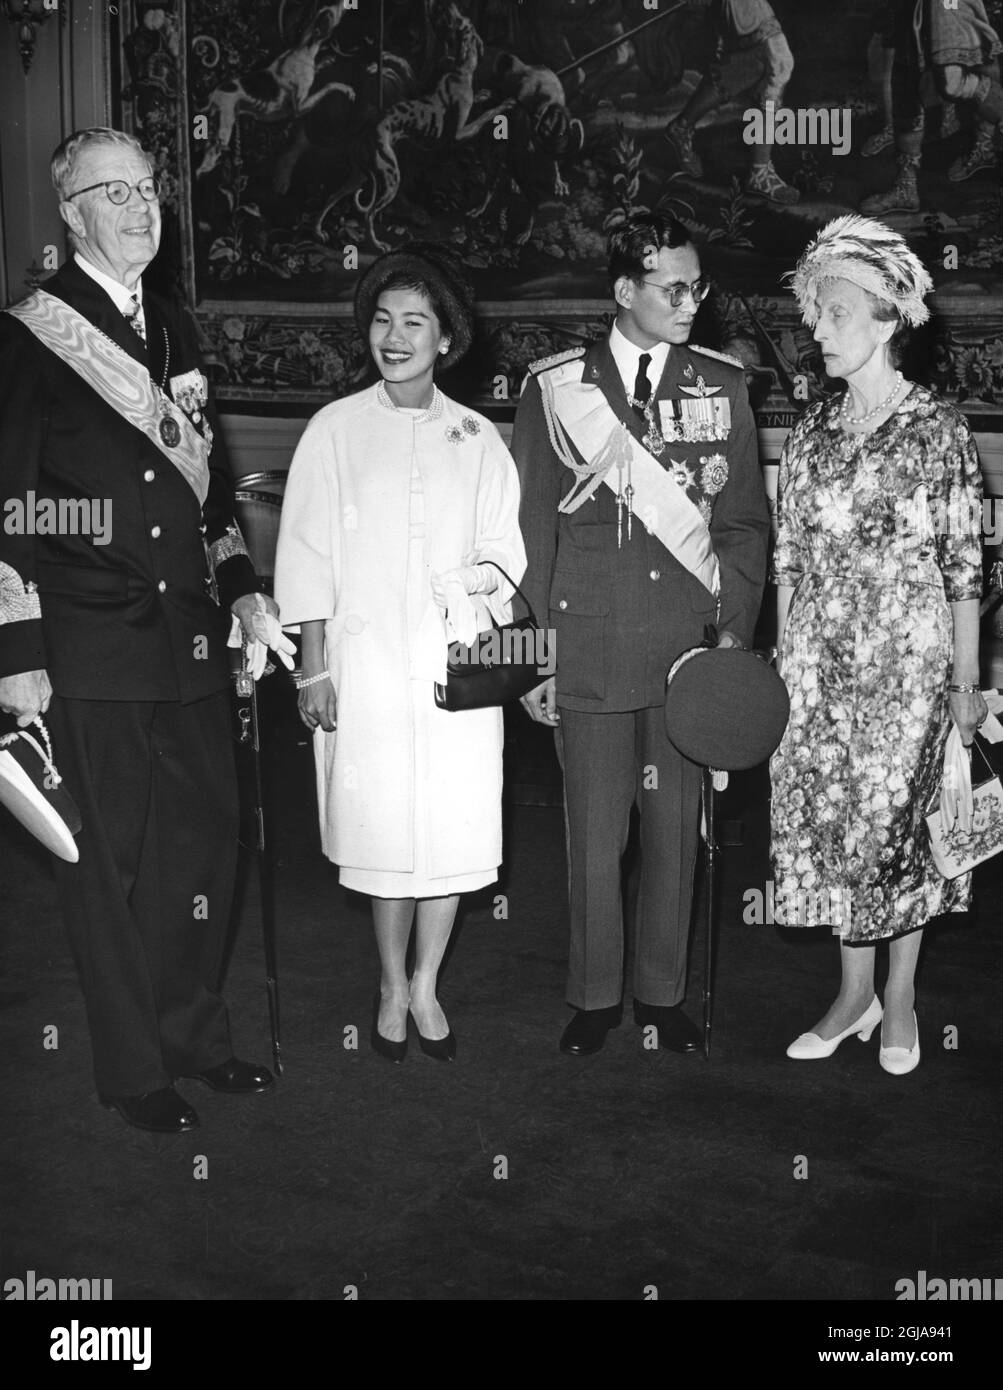 ARKIV 1960 King Bhumiphol and Queen Sirikit of Thailand today arrived to the Swedish capital for an official visit as guests of the King and Queen of Sweden from left: KIng Gustav VI Adolf, Queen Sirikit, King Bhumibol and Queen Louise. Foto: SCANPIX SWEDEN Kod: 190  Stock Photo